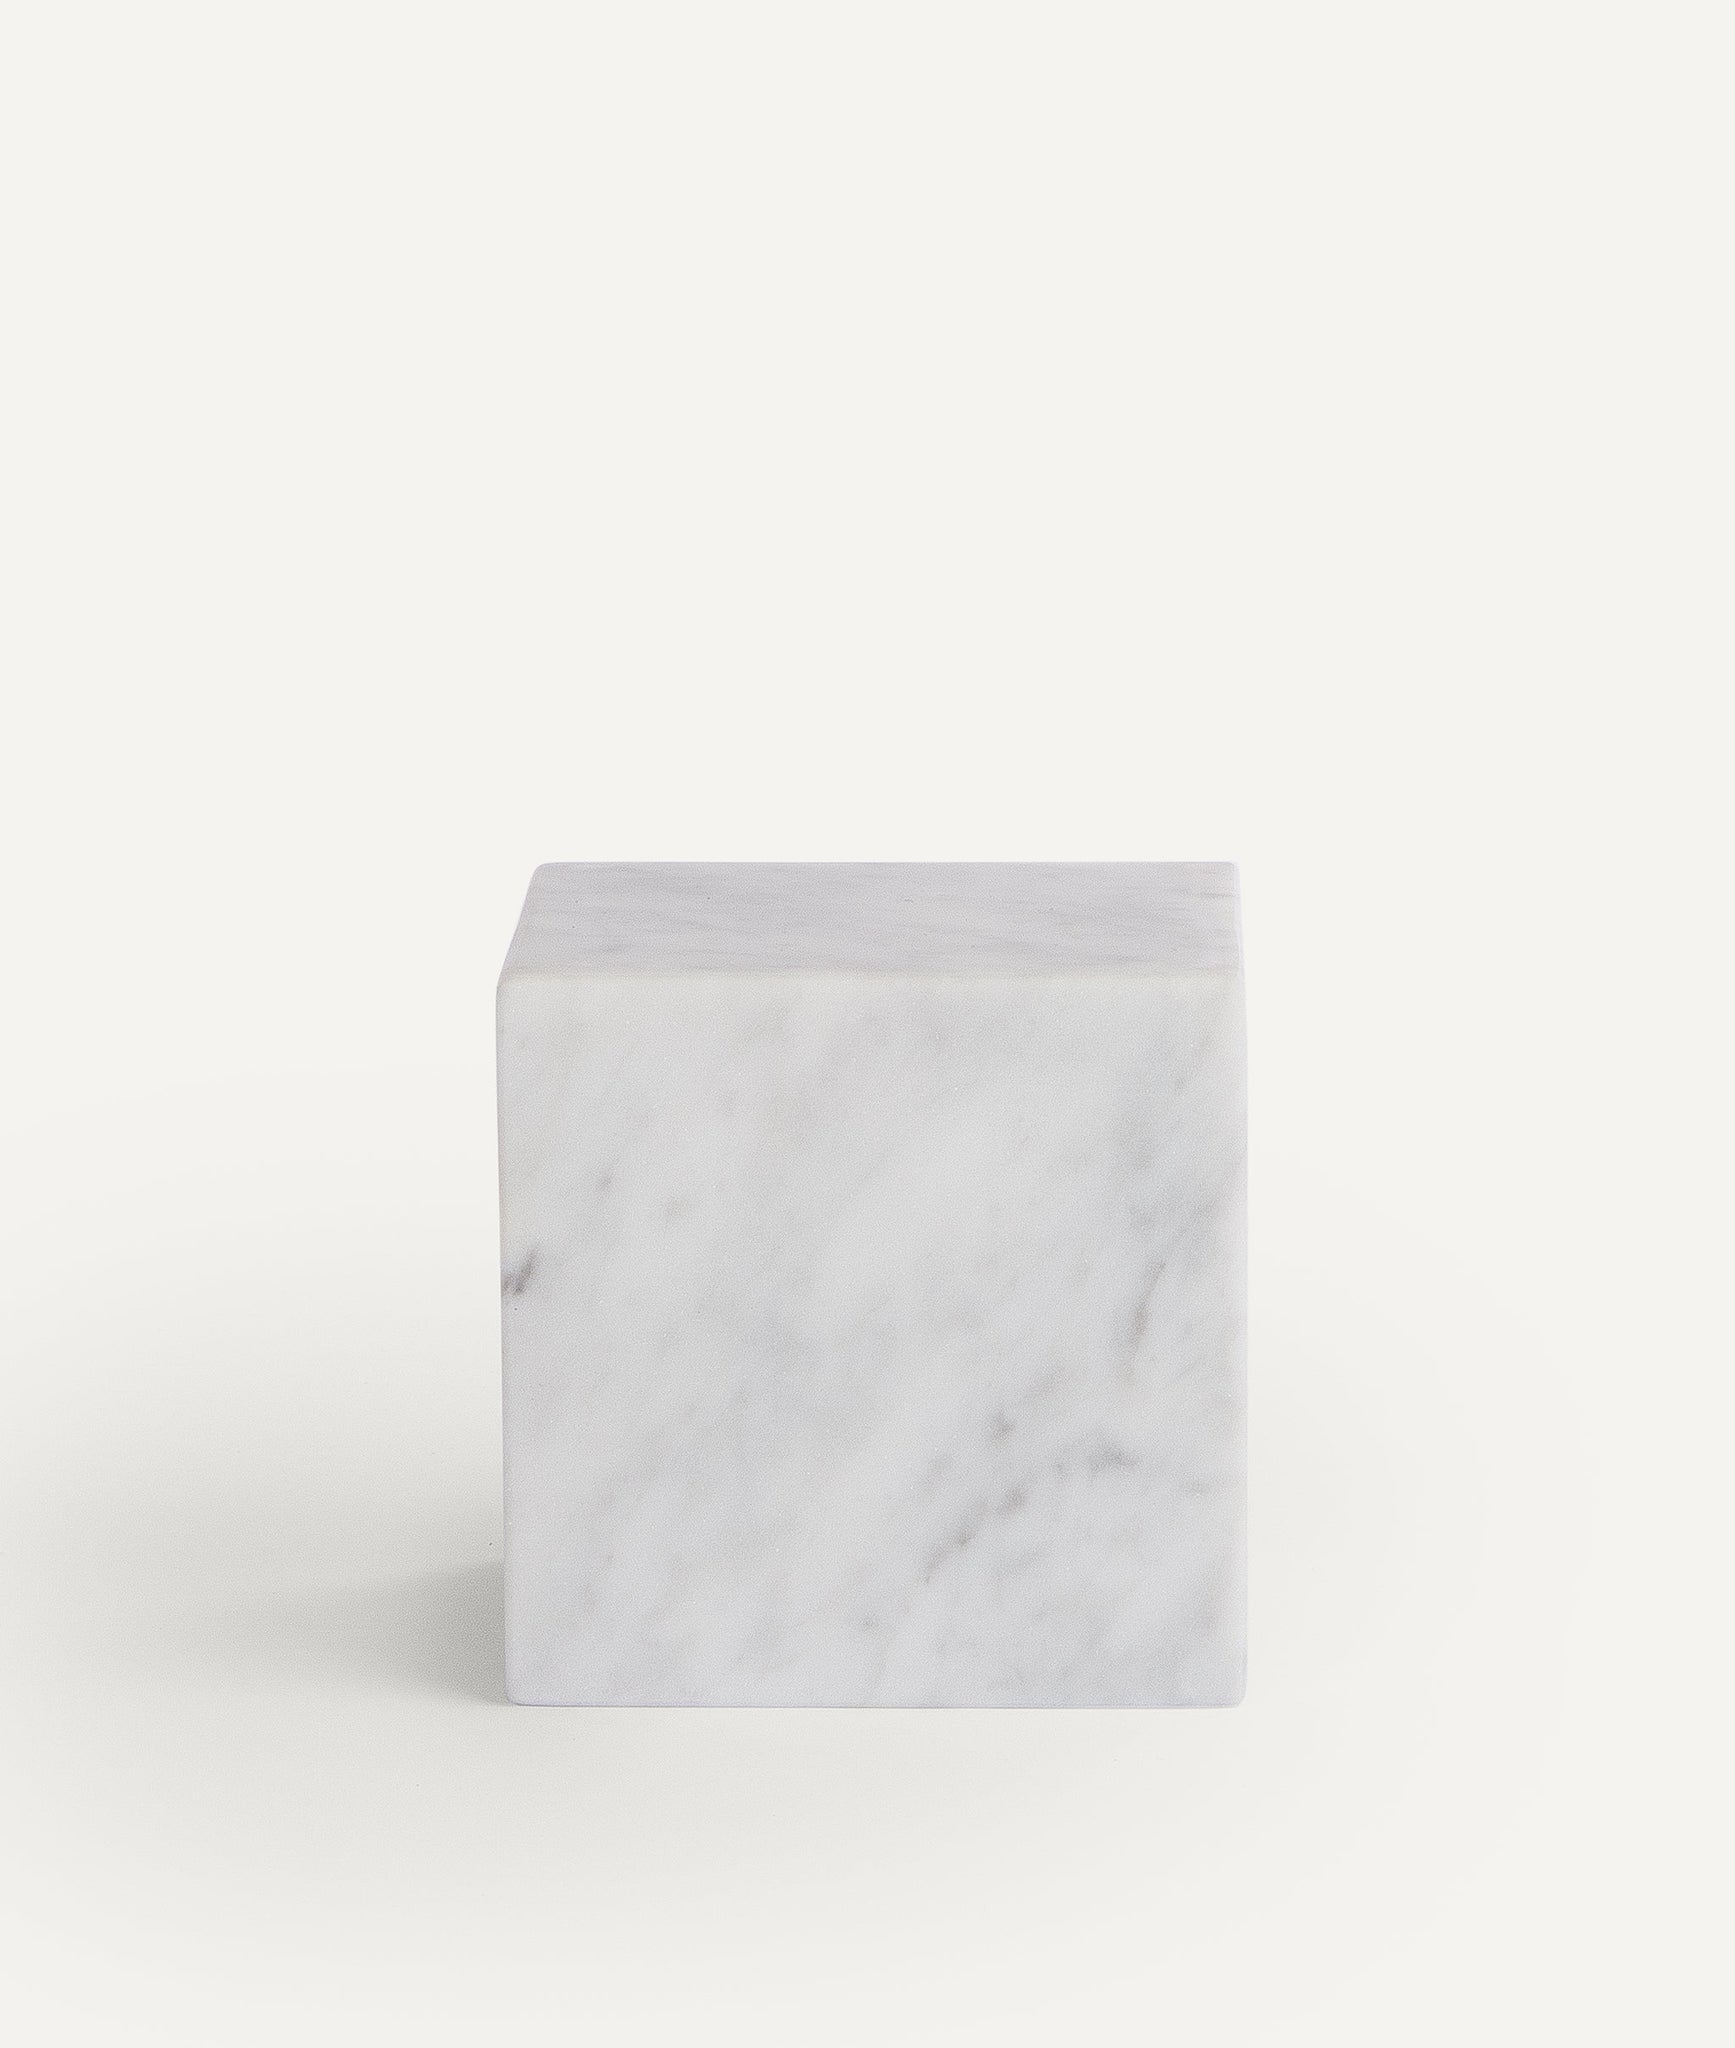 Paper weight in Carrara Marble